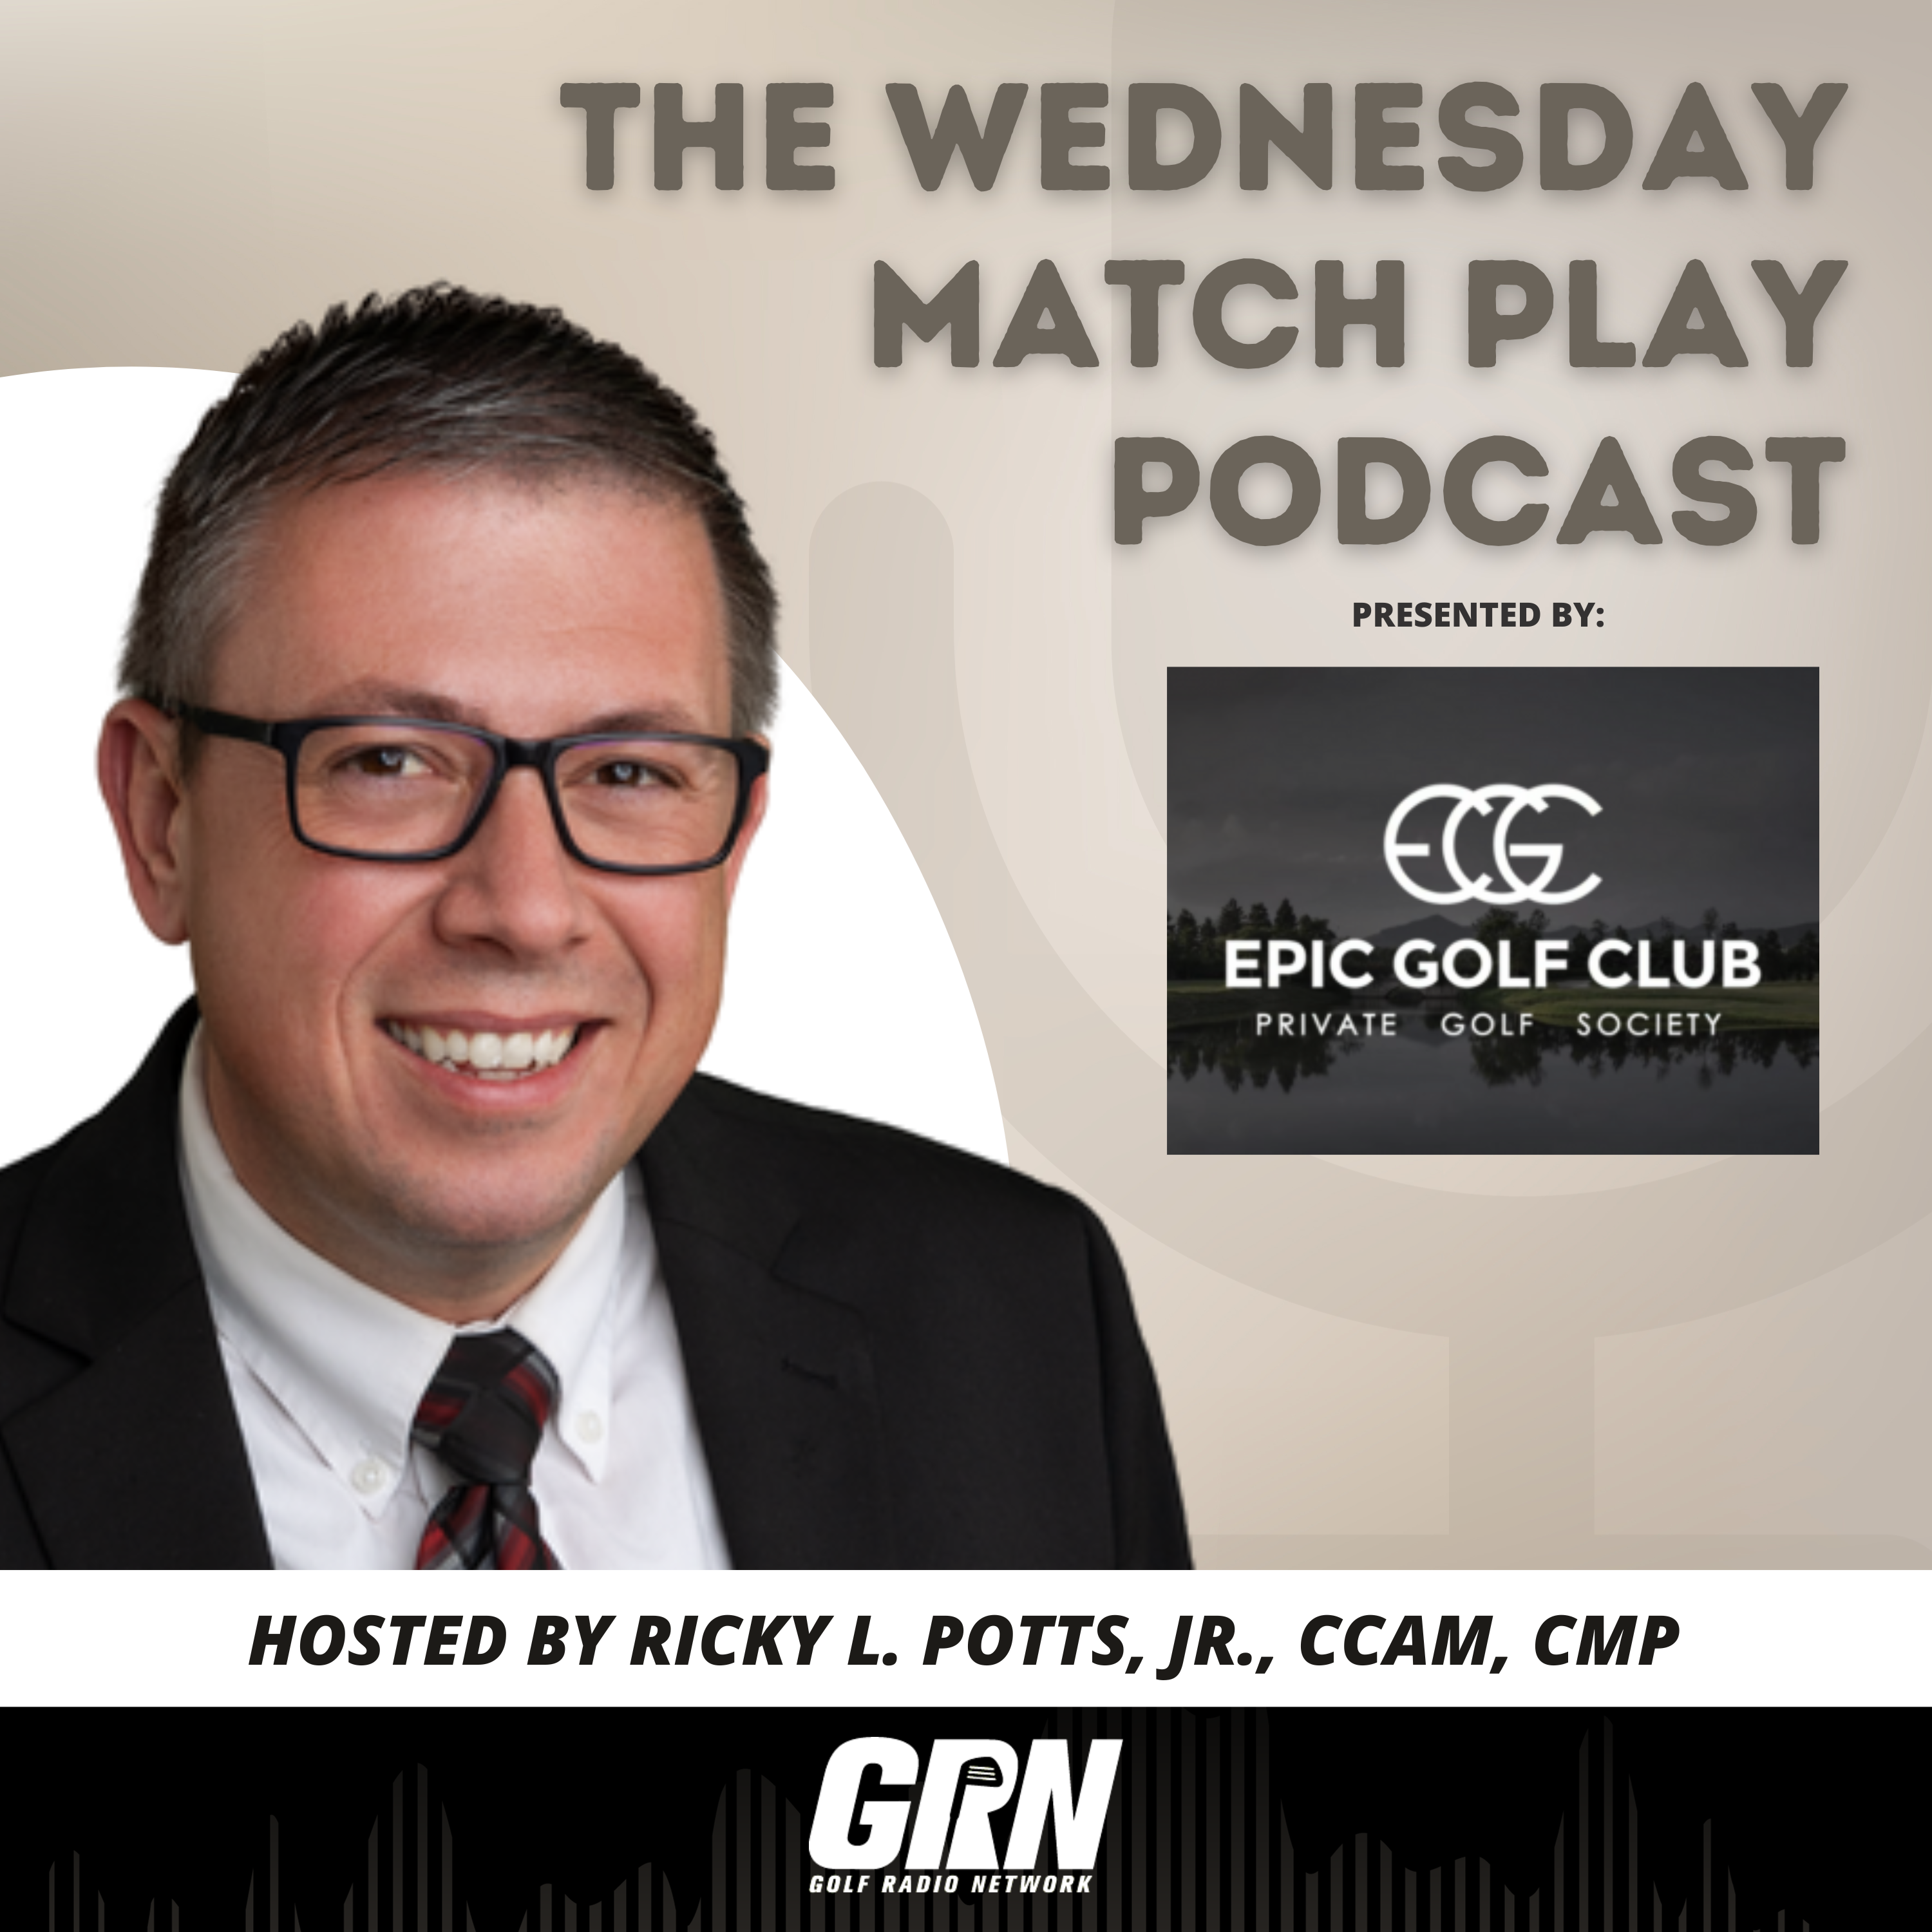 The Wednesday Match Play Podcast powered by Epic Golf Club